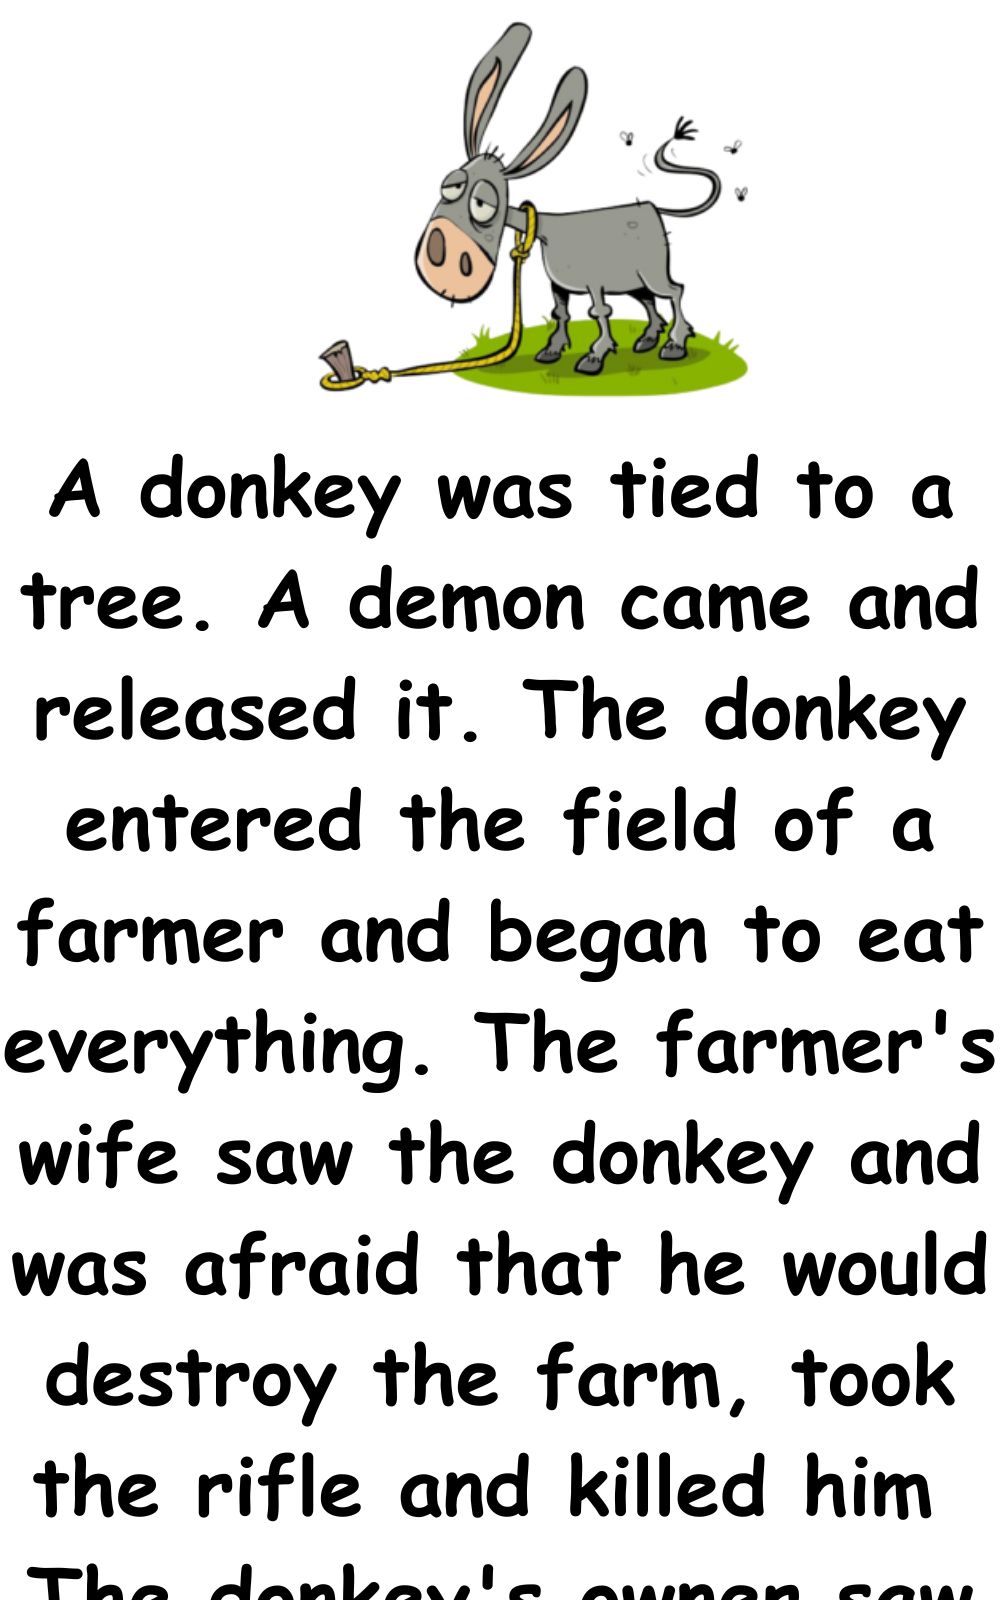 A donkey was tied to a tree